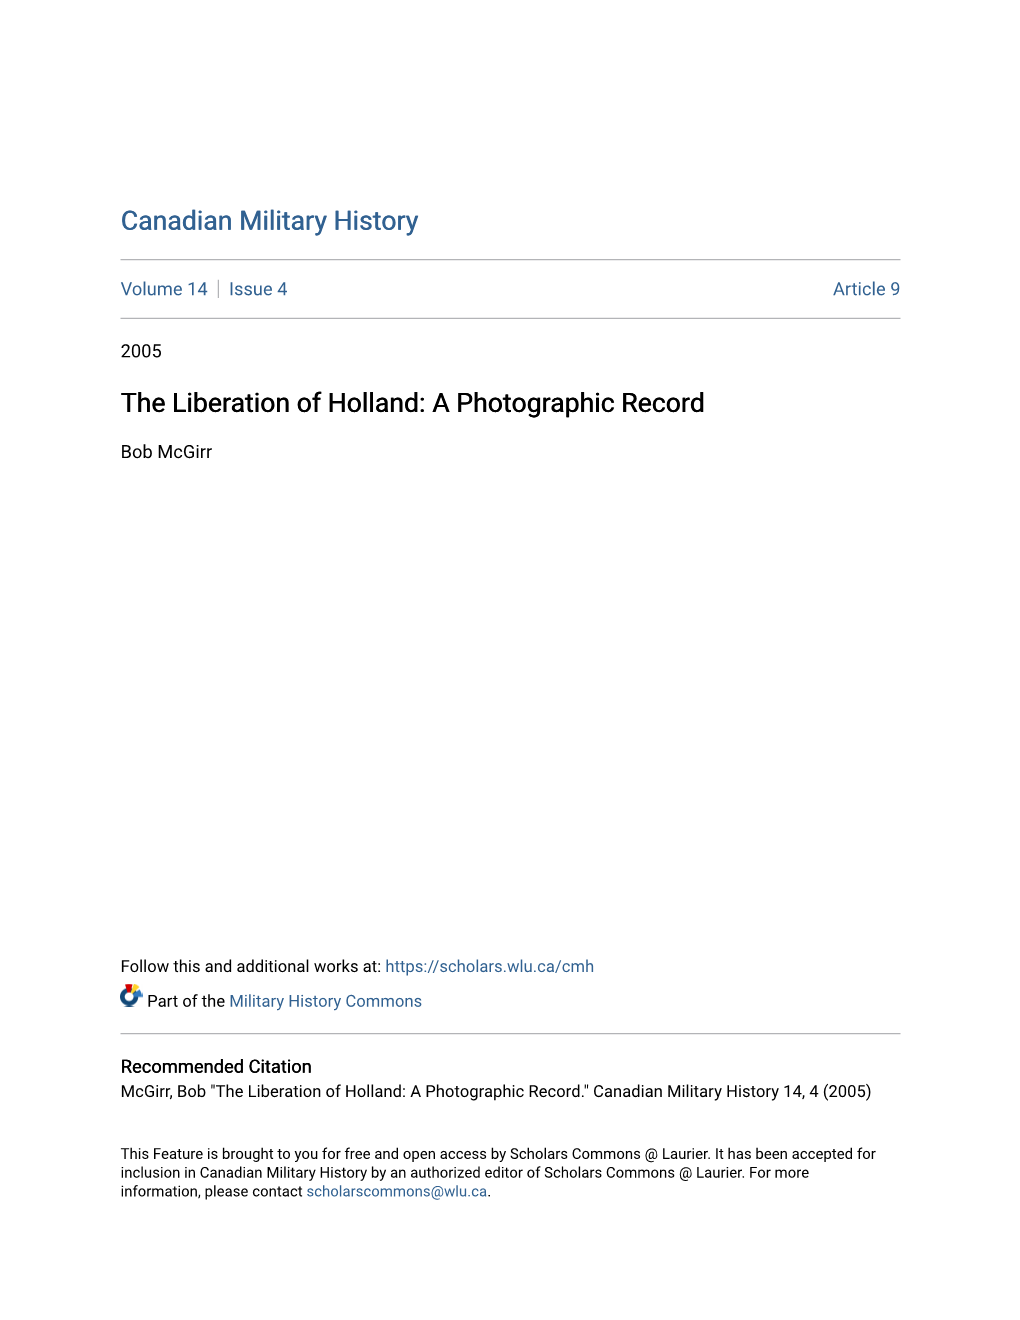 The Liberation of Holland: a Photographic Record